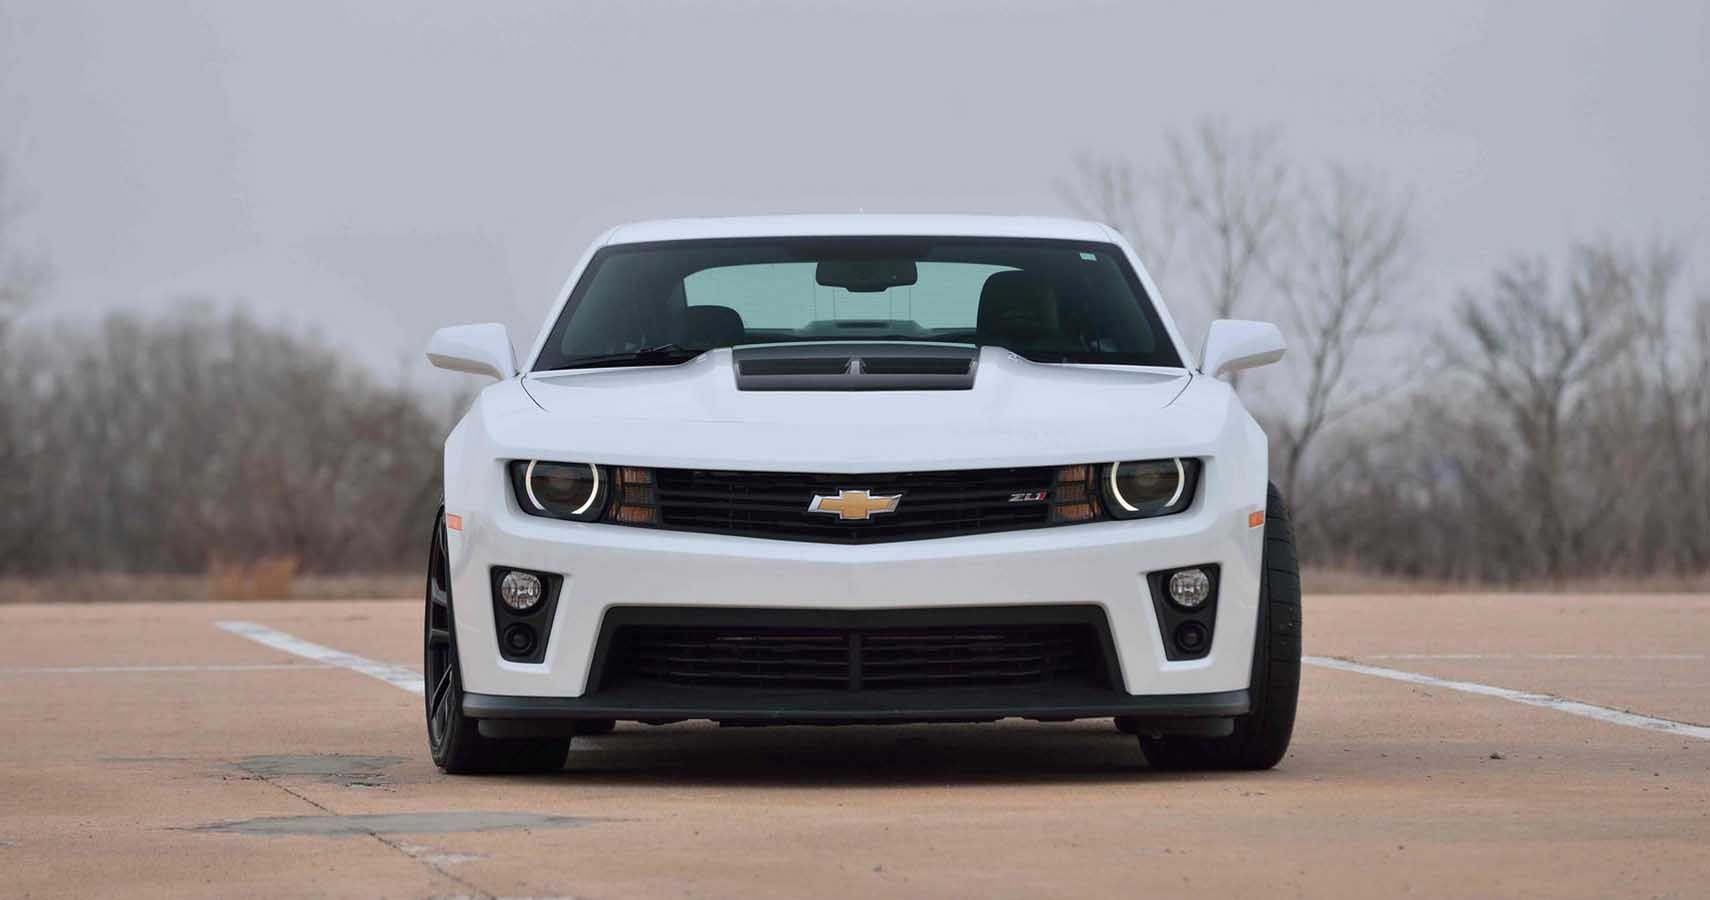 2012 Camaro ZL1;  One of the best bang for the buck sports cars on the used market.